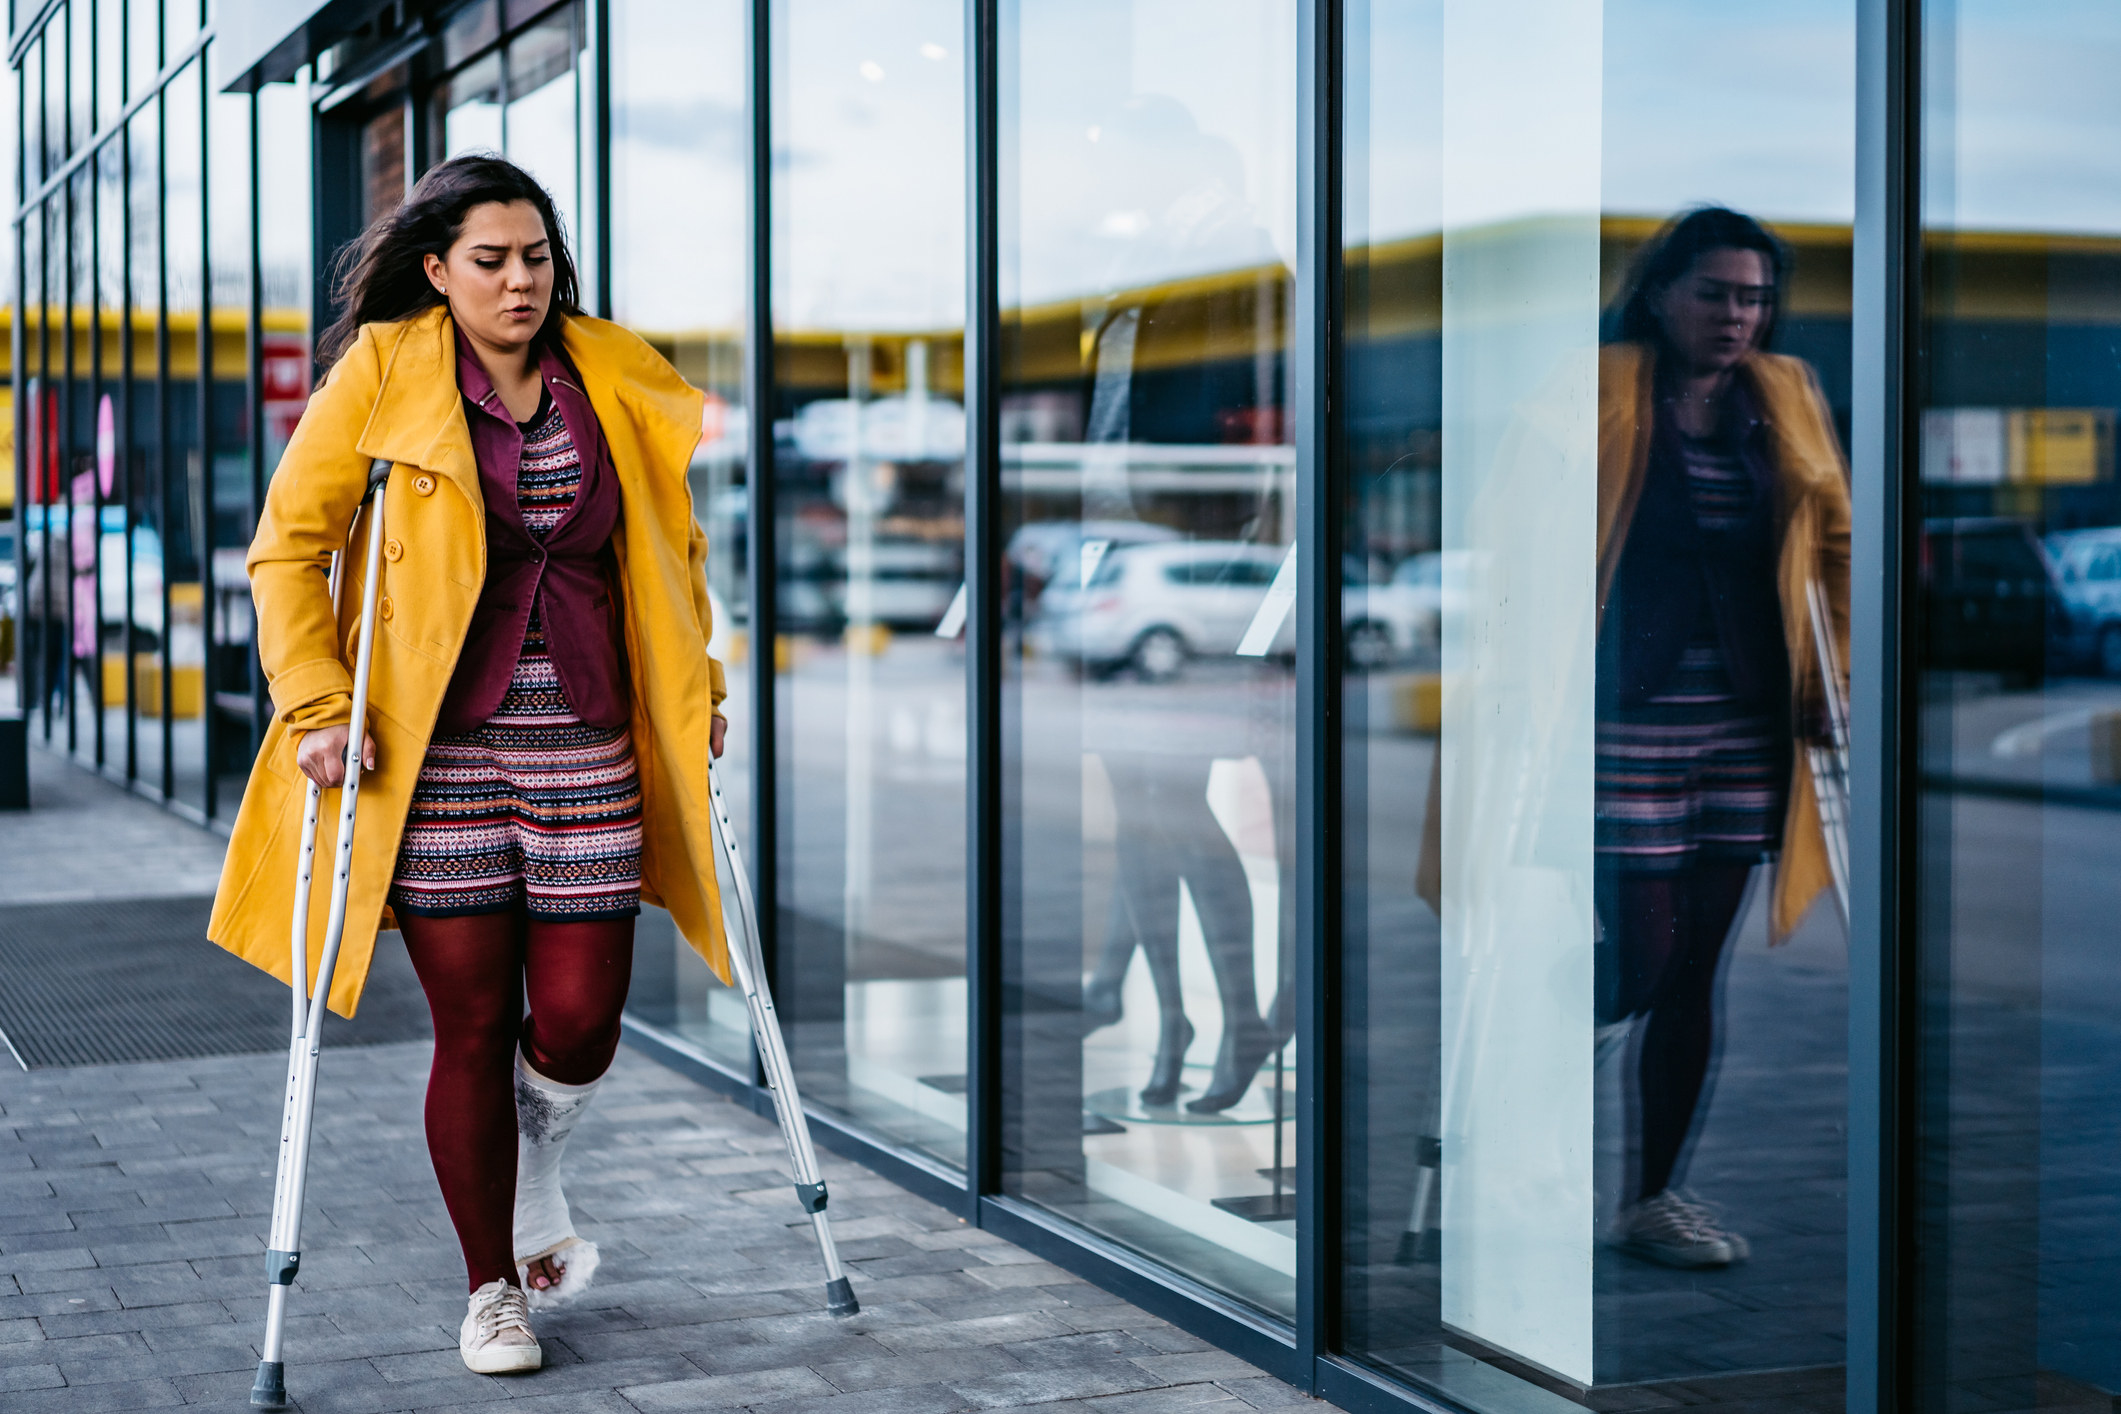 Woman walking while using crutches